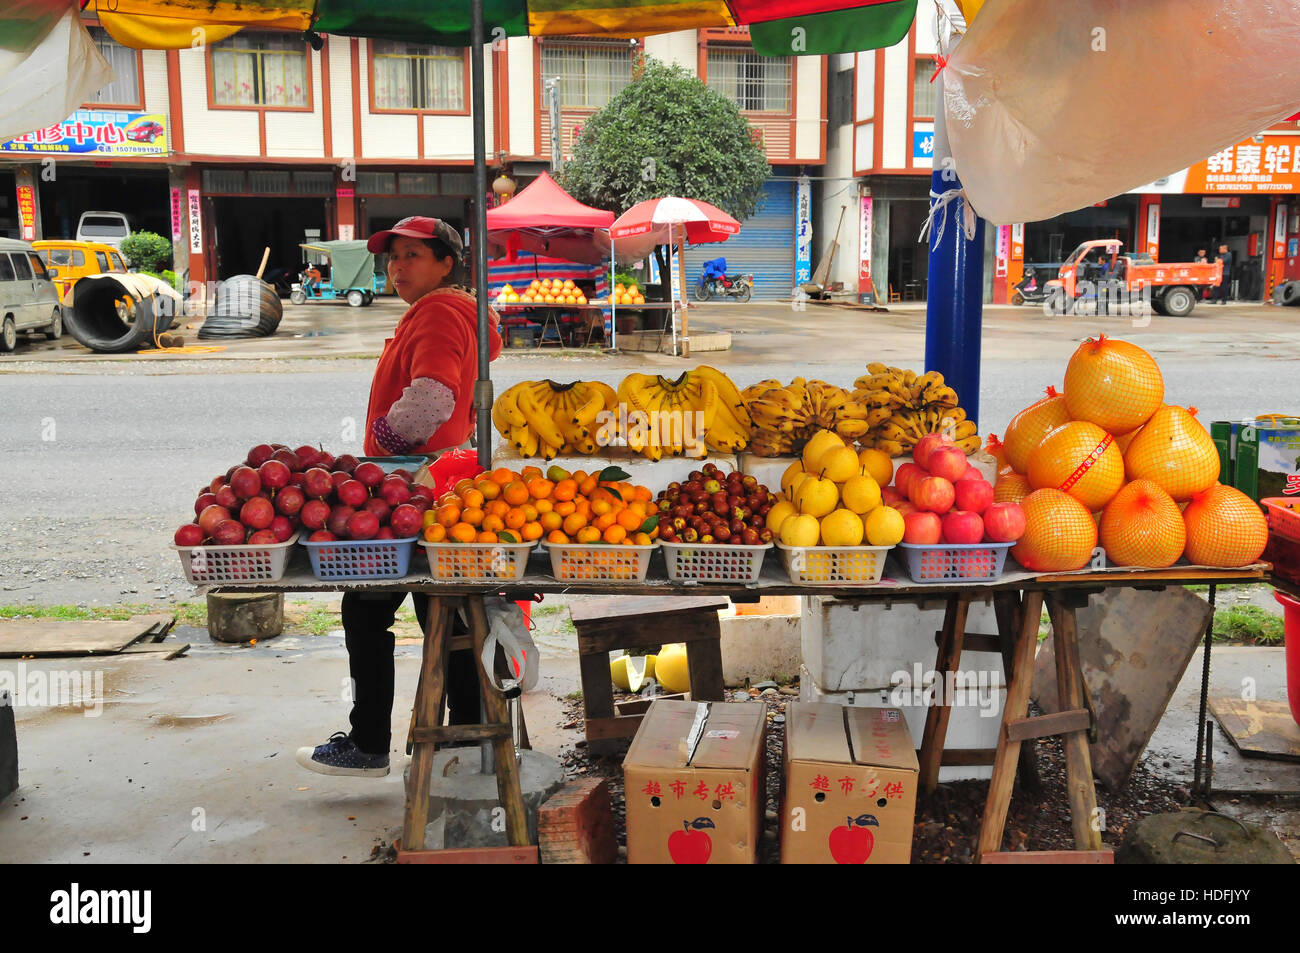 Vendors often sell food, such as fruit, on stands in Guilin, China. Stock Photo